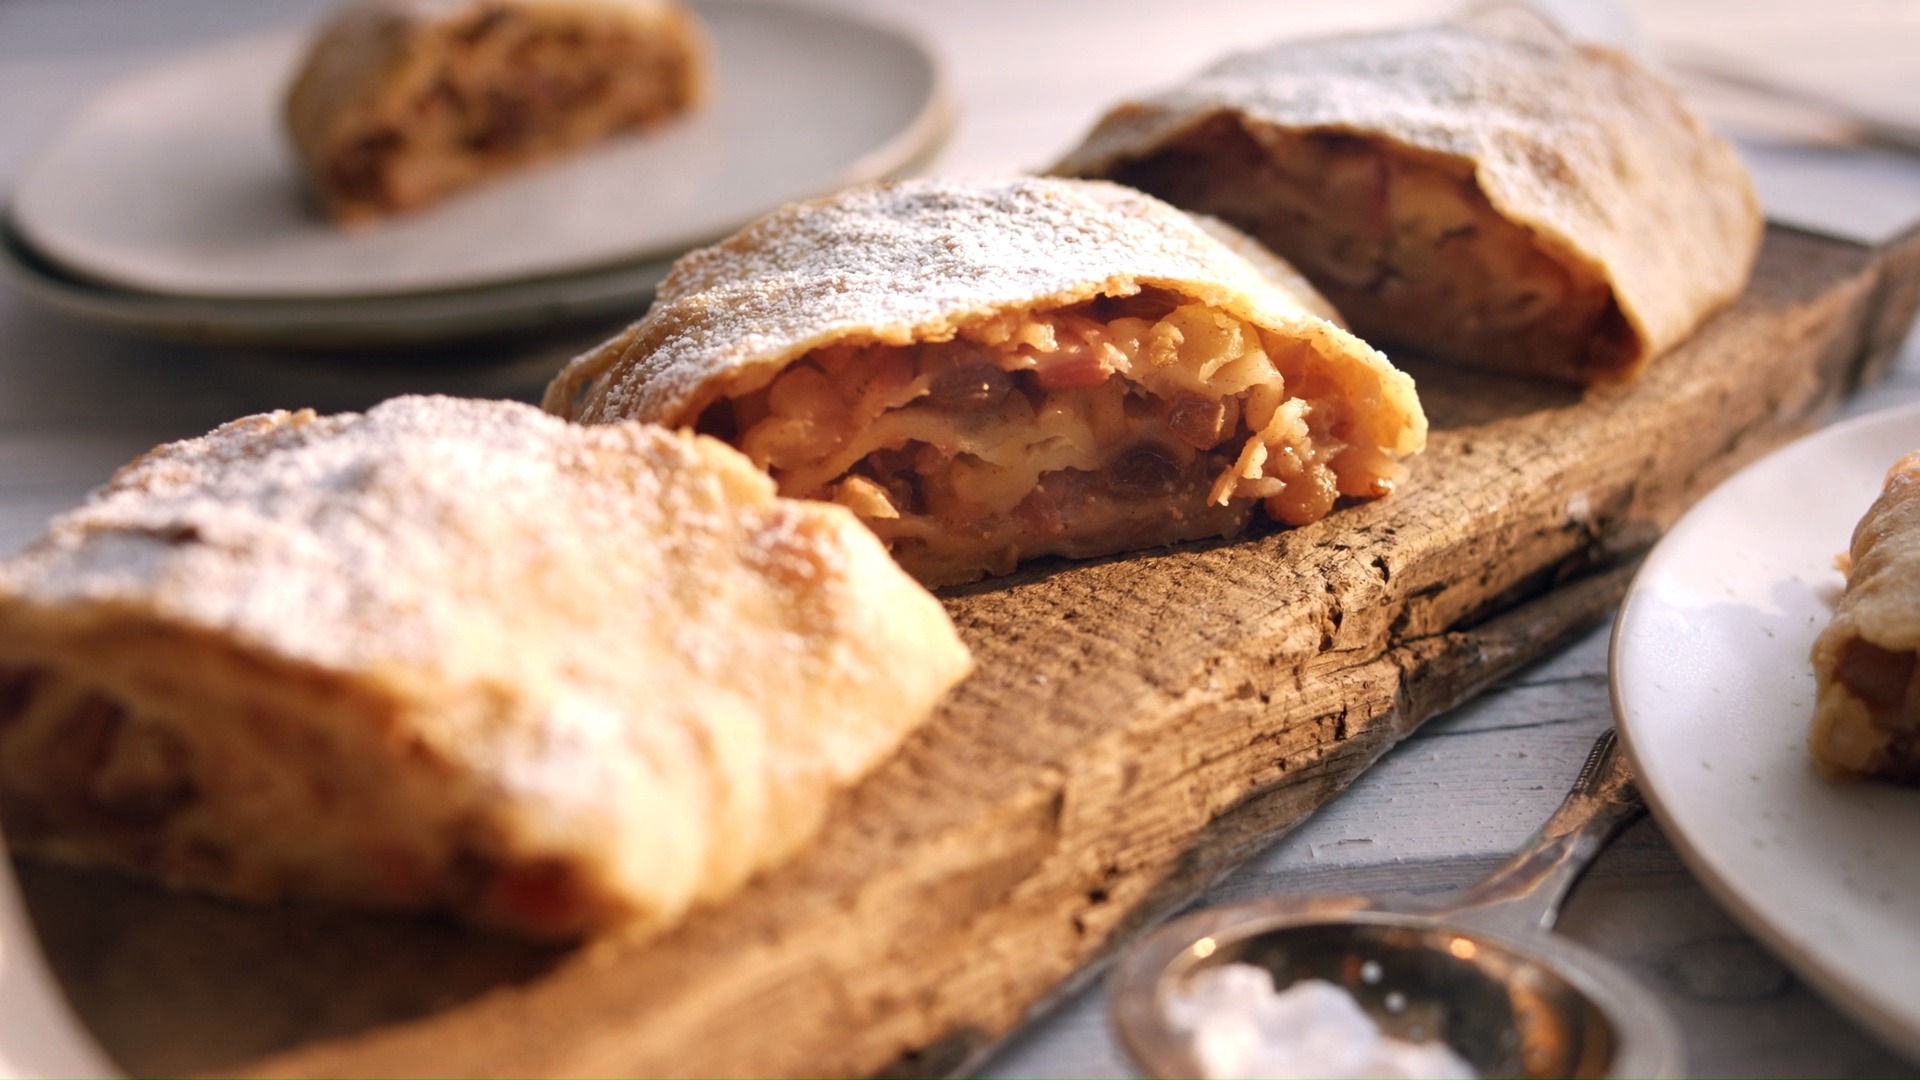 Strudel: A national dish and culinary heritage of Austria. 1920x1080 Full HD Wallpaper.